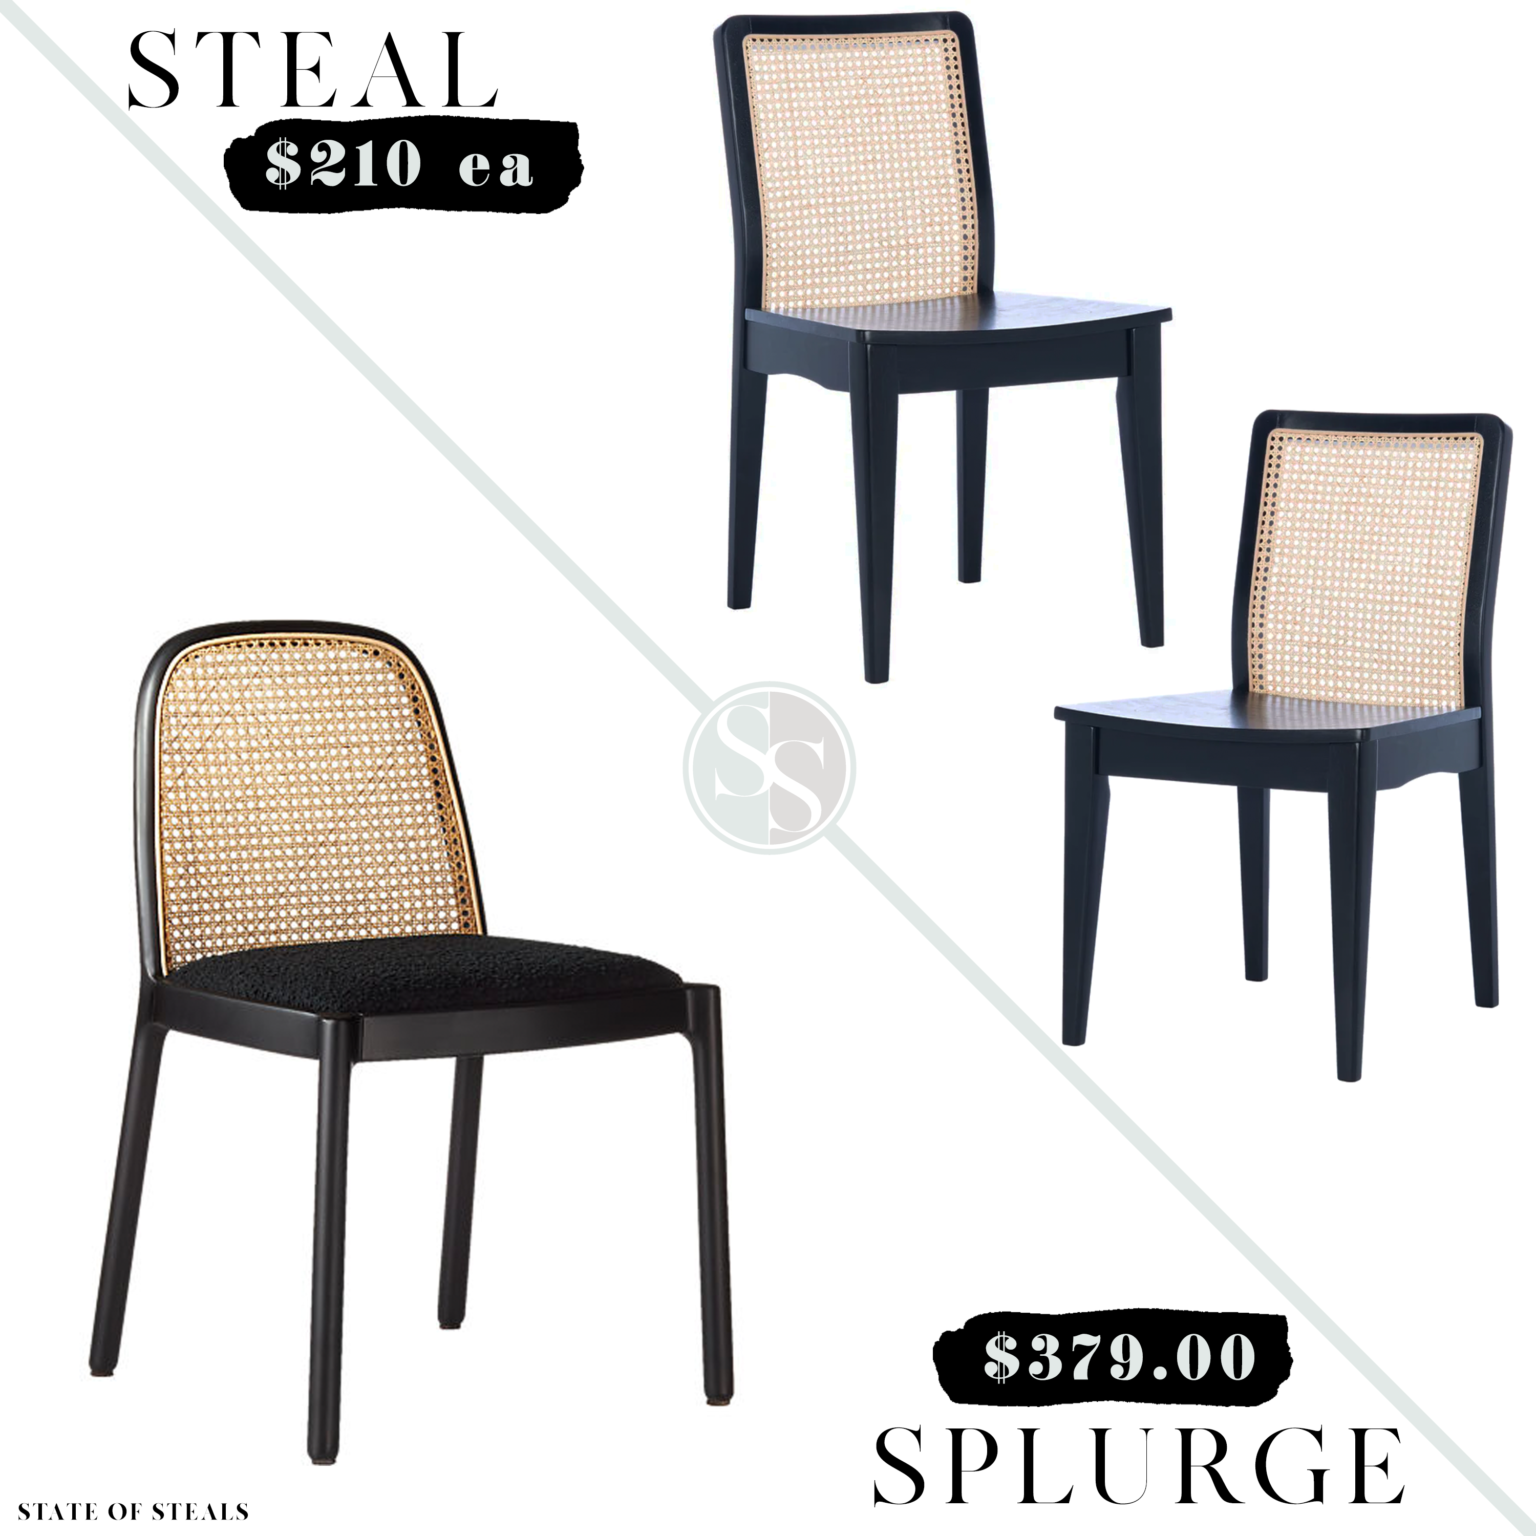 Black Cane Dining Chair Look for Less - State of Steals